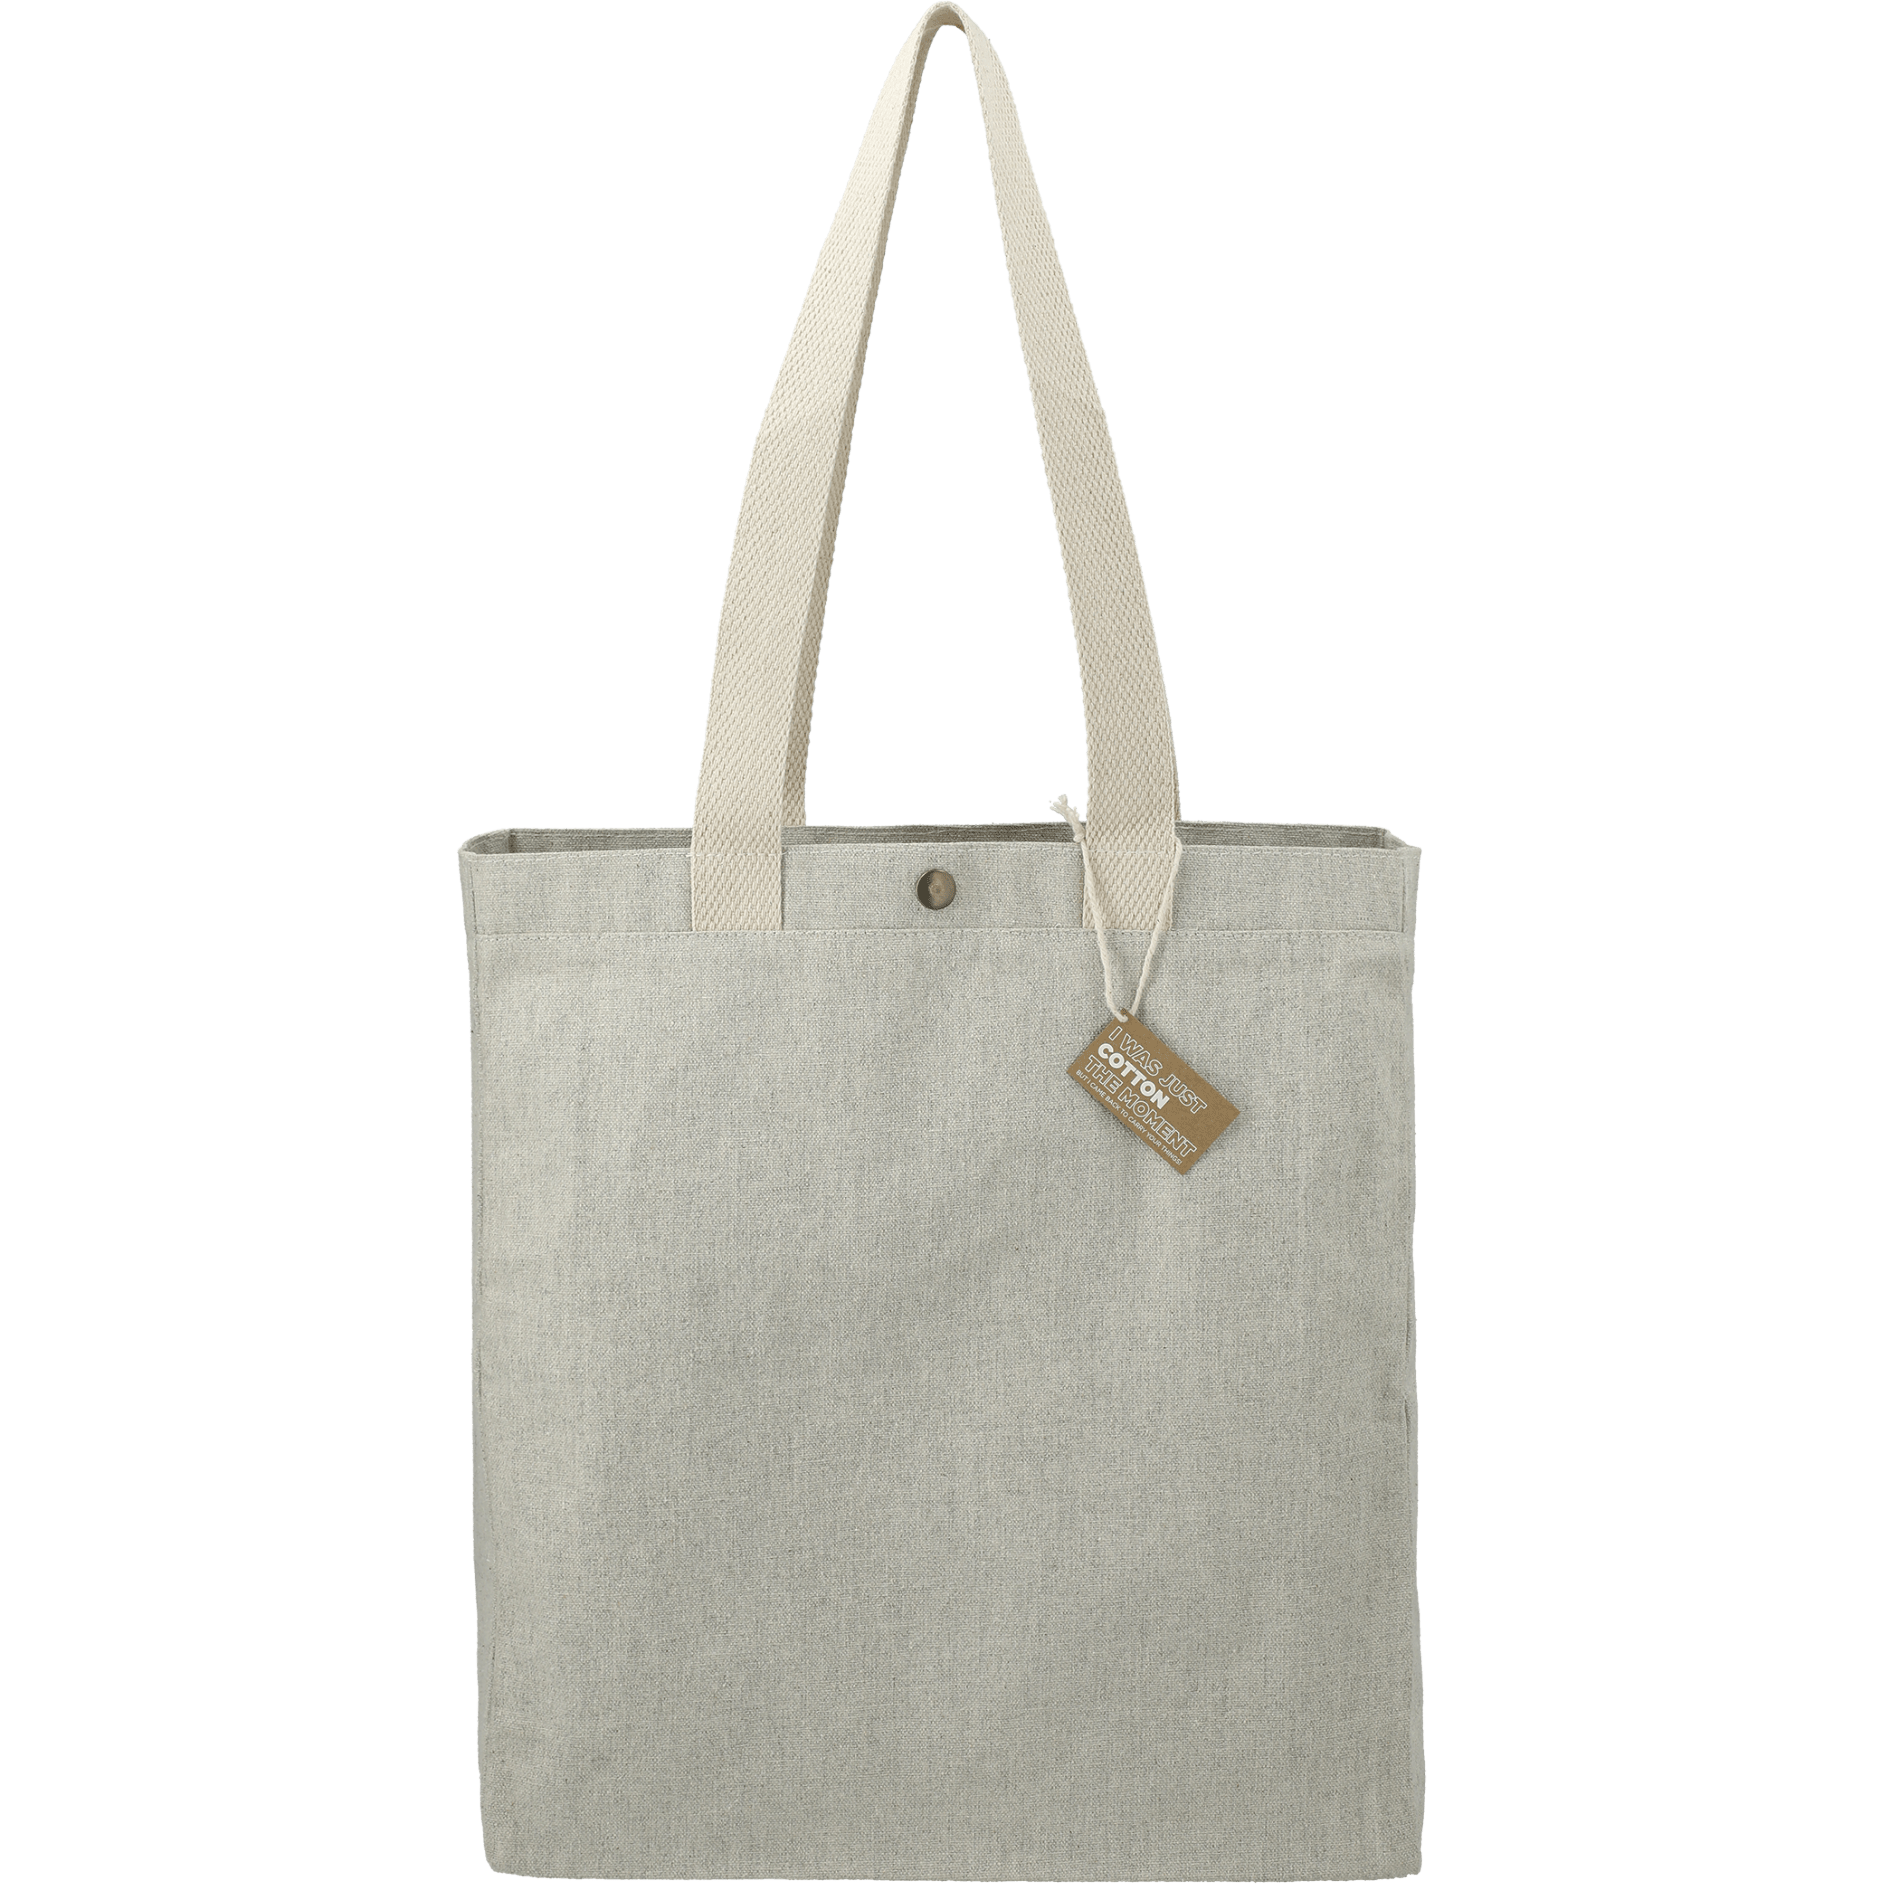 LEEDS 7901-02 - Repose 10oz Recycled Cotton Box Tote w/Snap